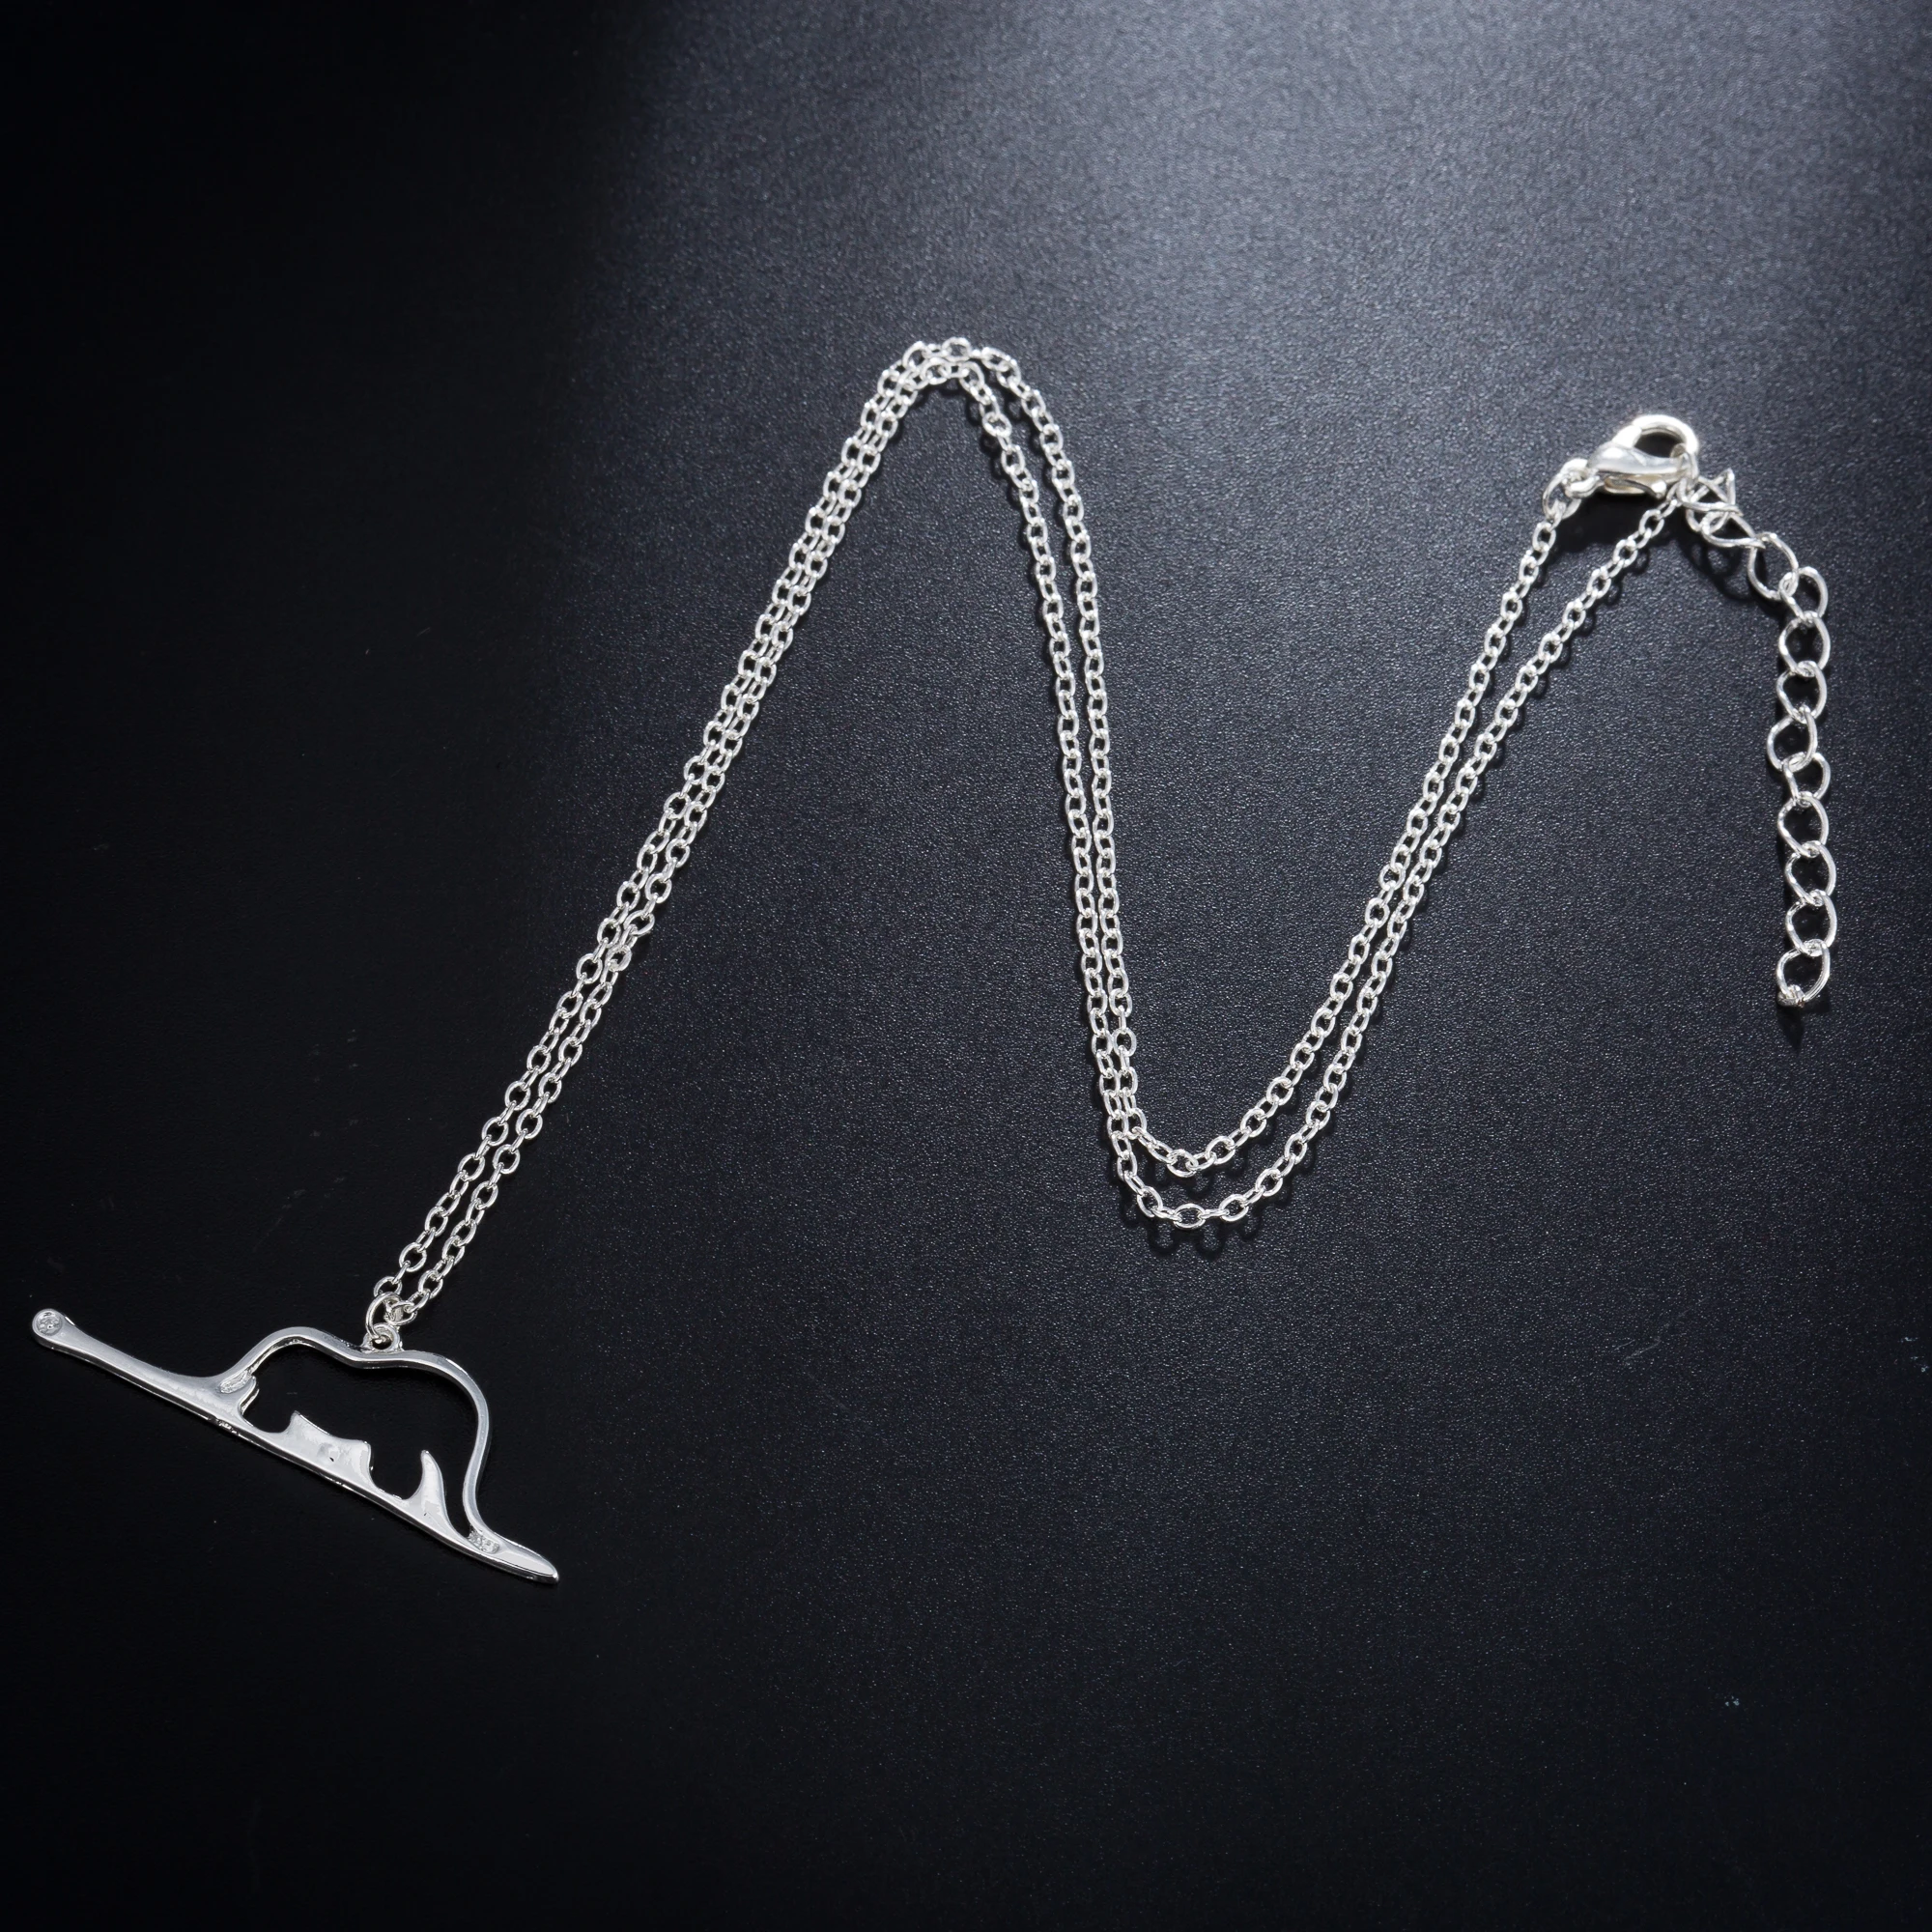 Maly necklace stainless steel